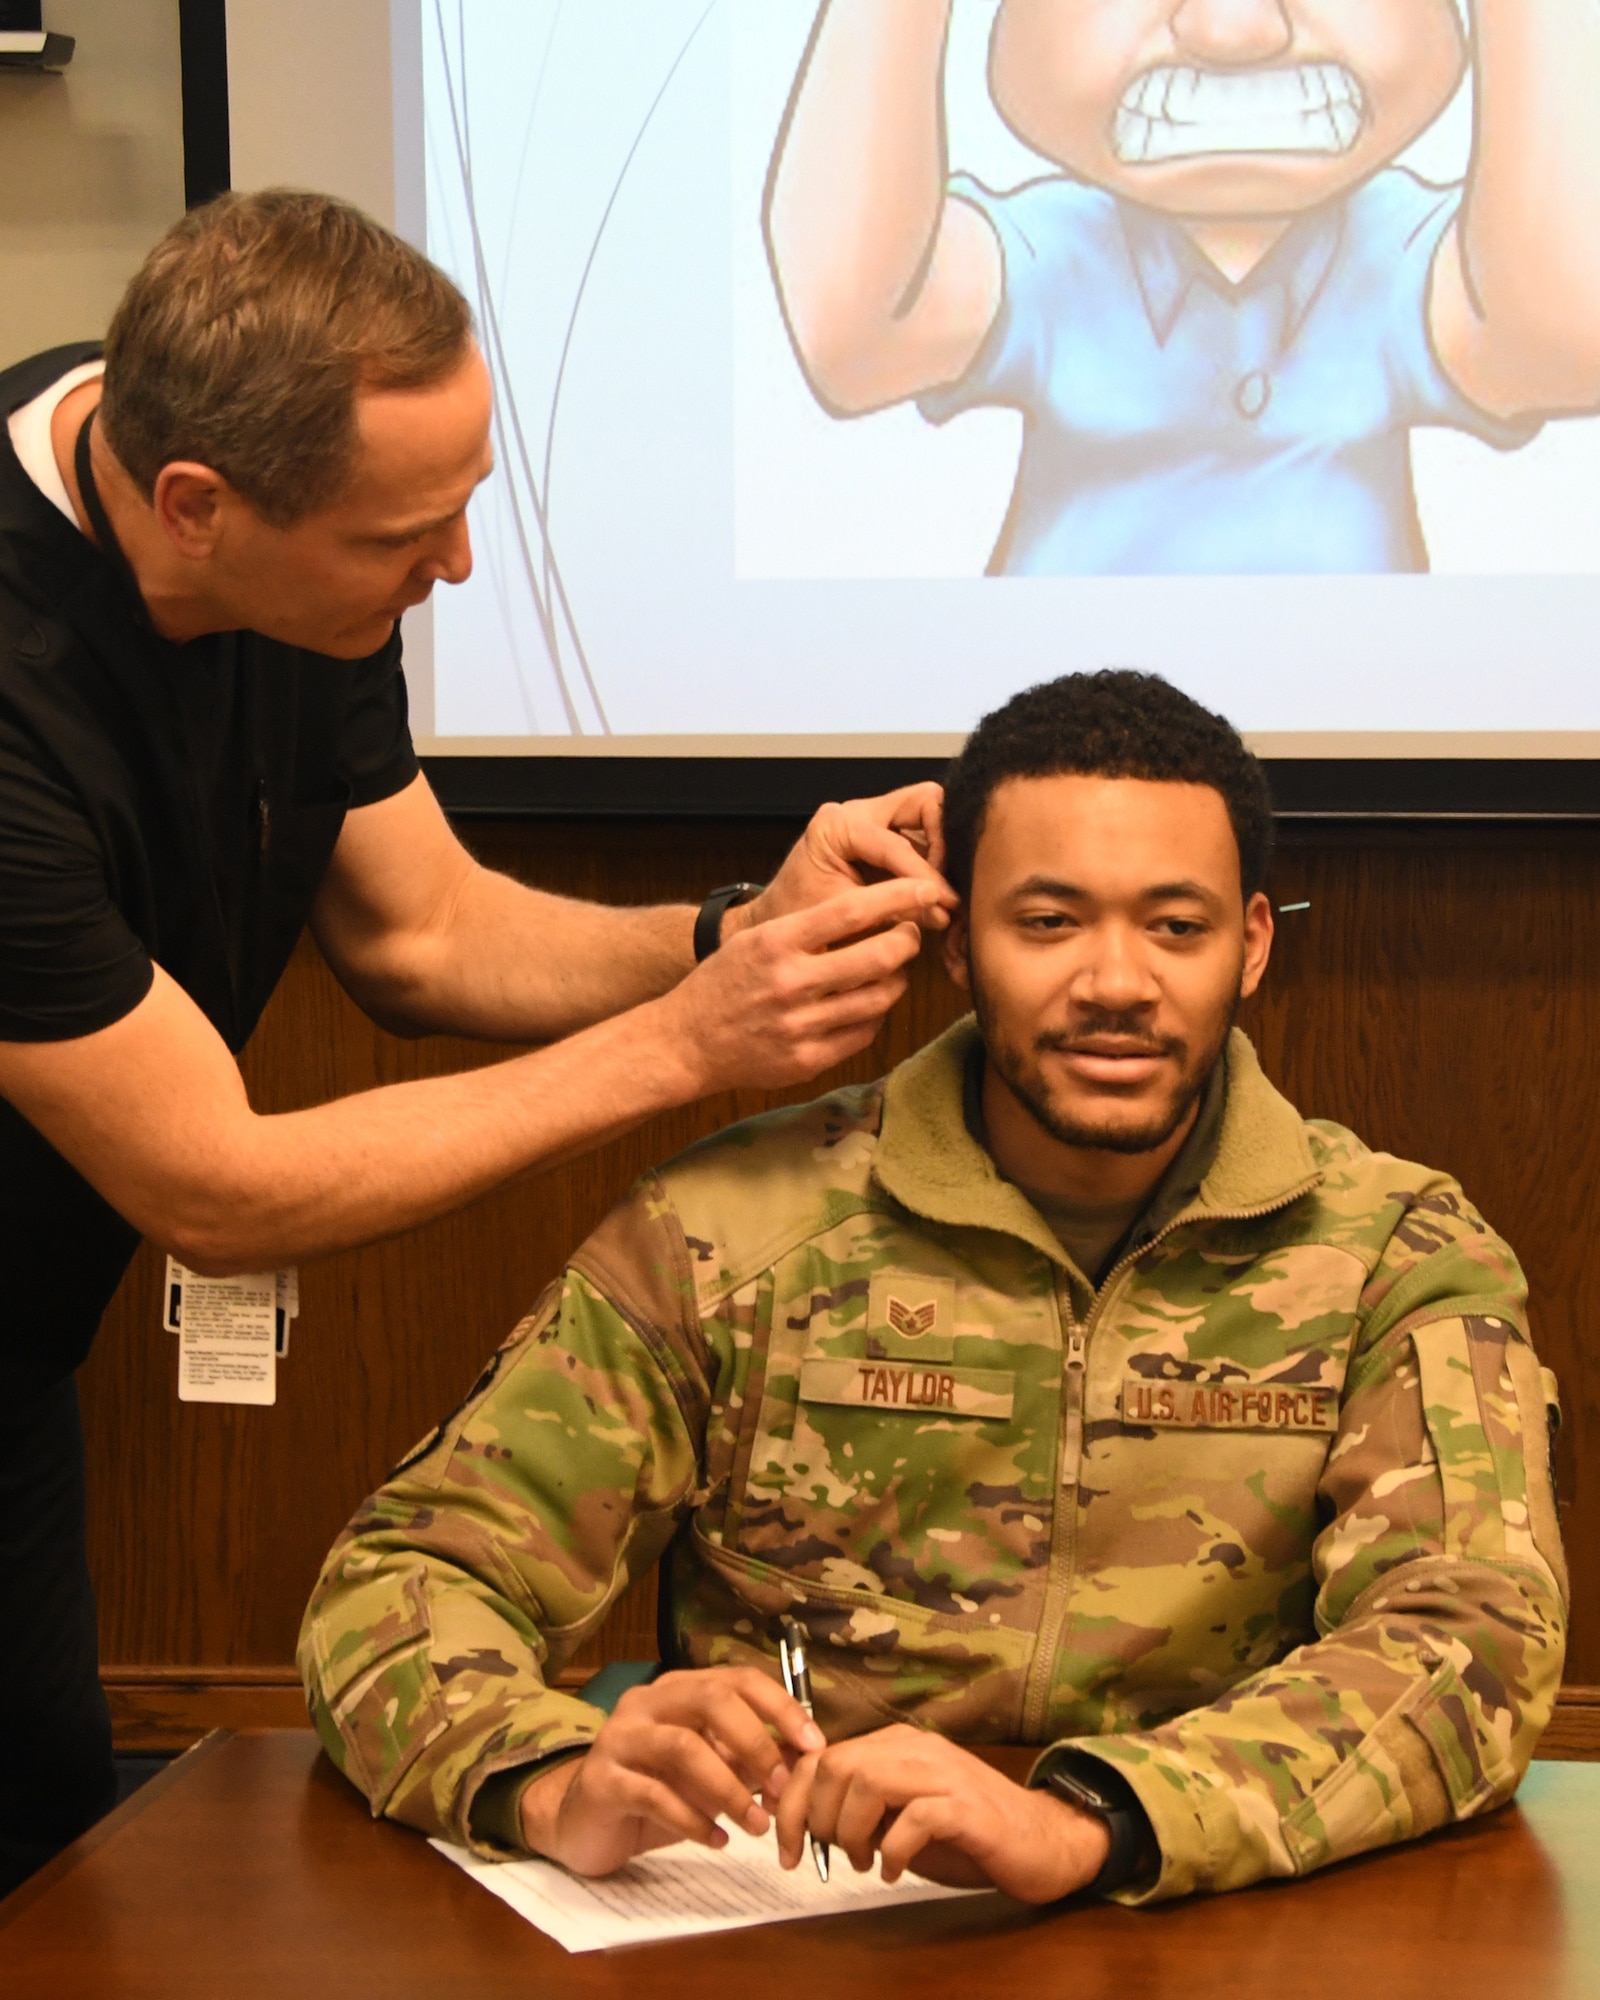 Staff Sgt. Brian Taylor, 756th Air Refueling Squadron, receives acupuncture needles during a free acupuncture session held at the 459th Air Refueling Wing headquarters building at Joint Base Andrews, Md., March 8, 2023. The acupuncturist was brought to the unit by the 459th Military and Family Readiness Office.